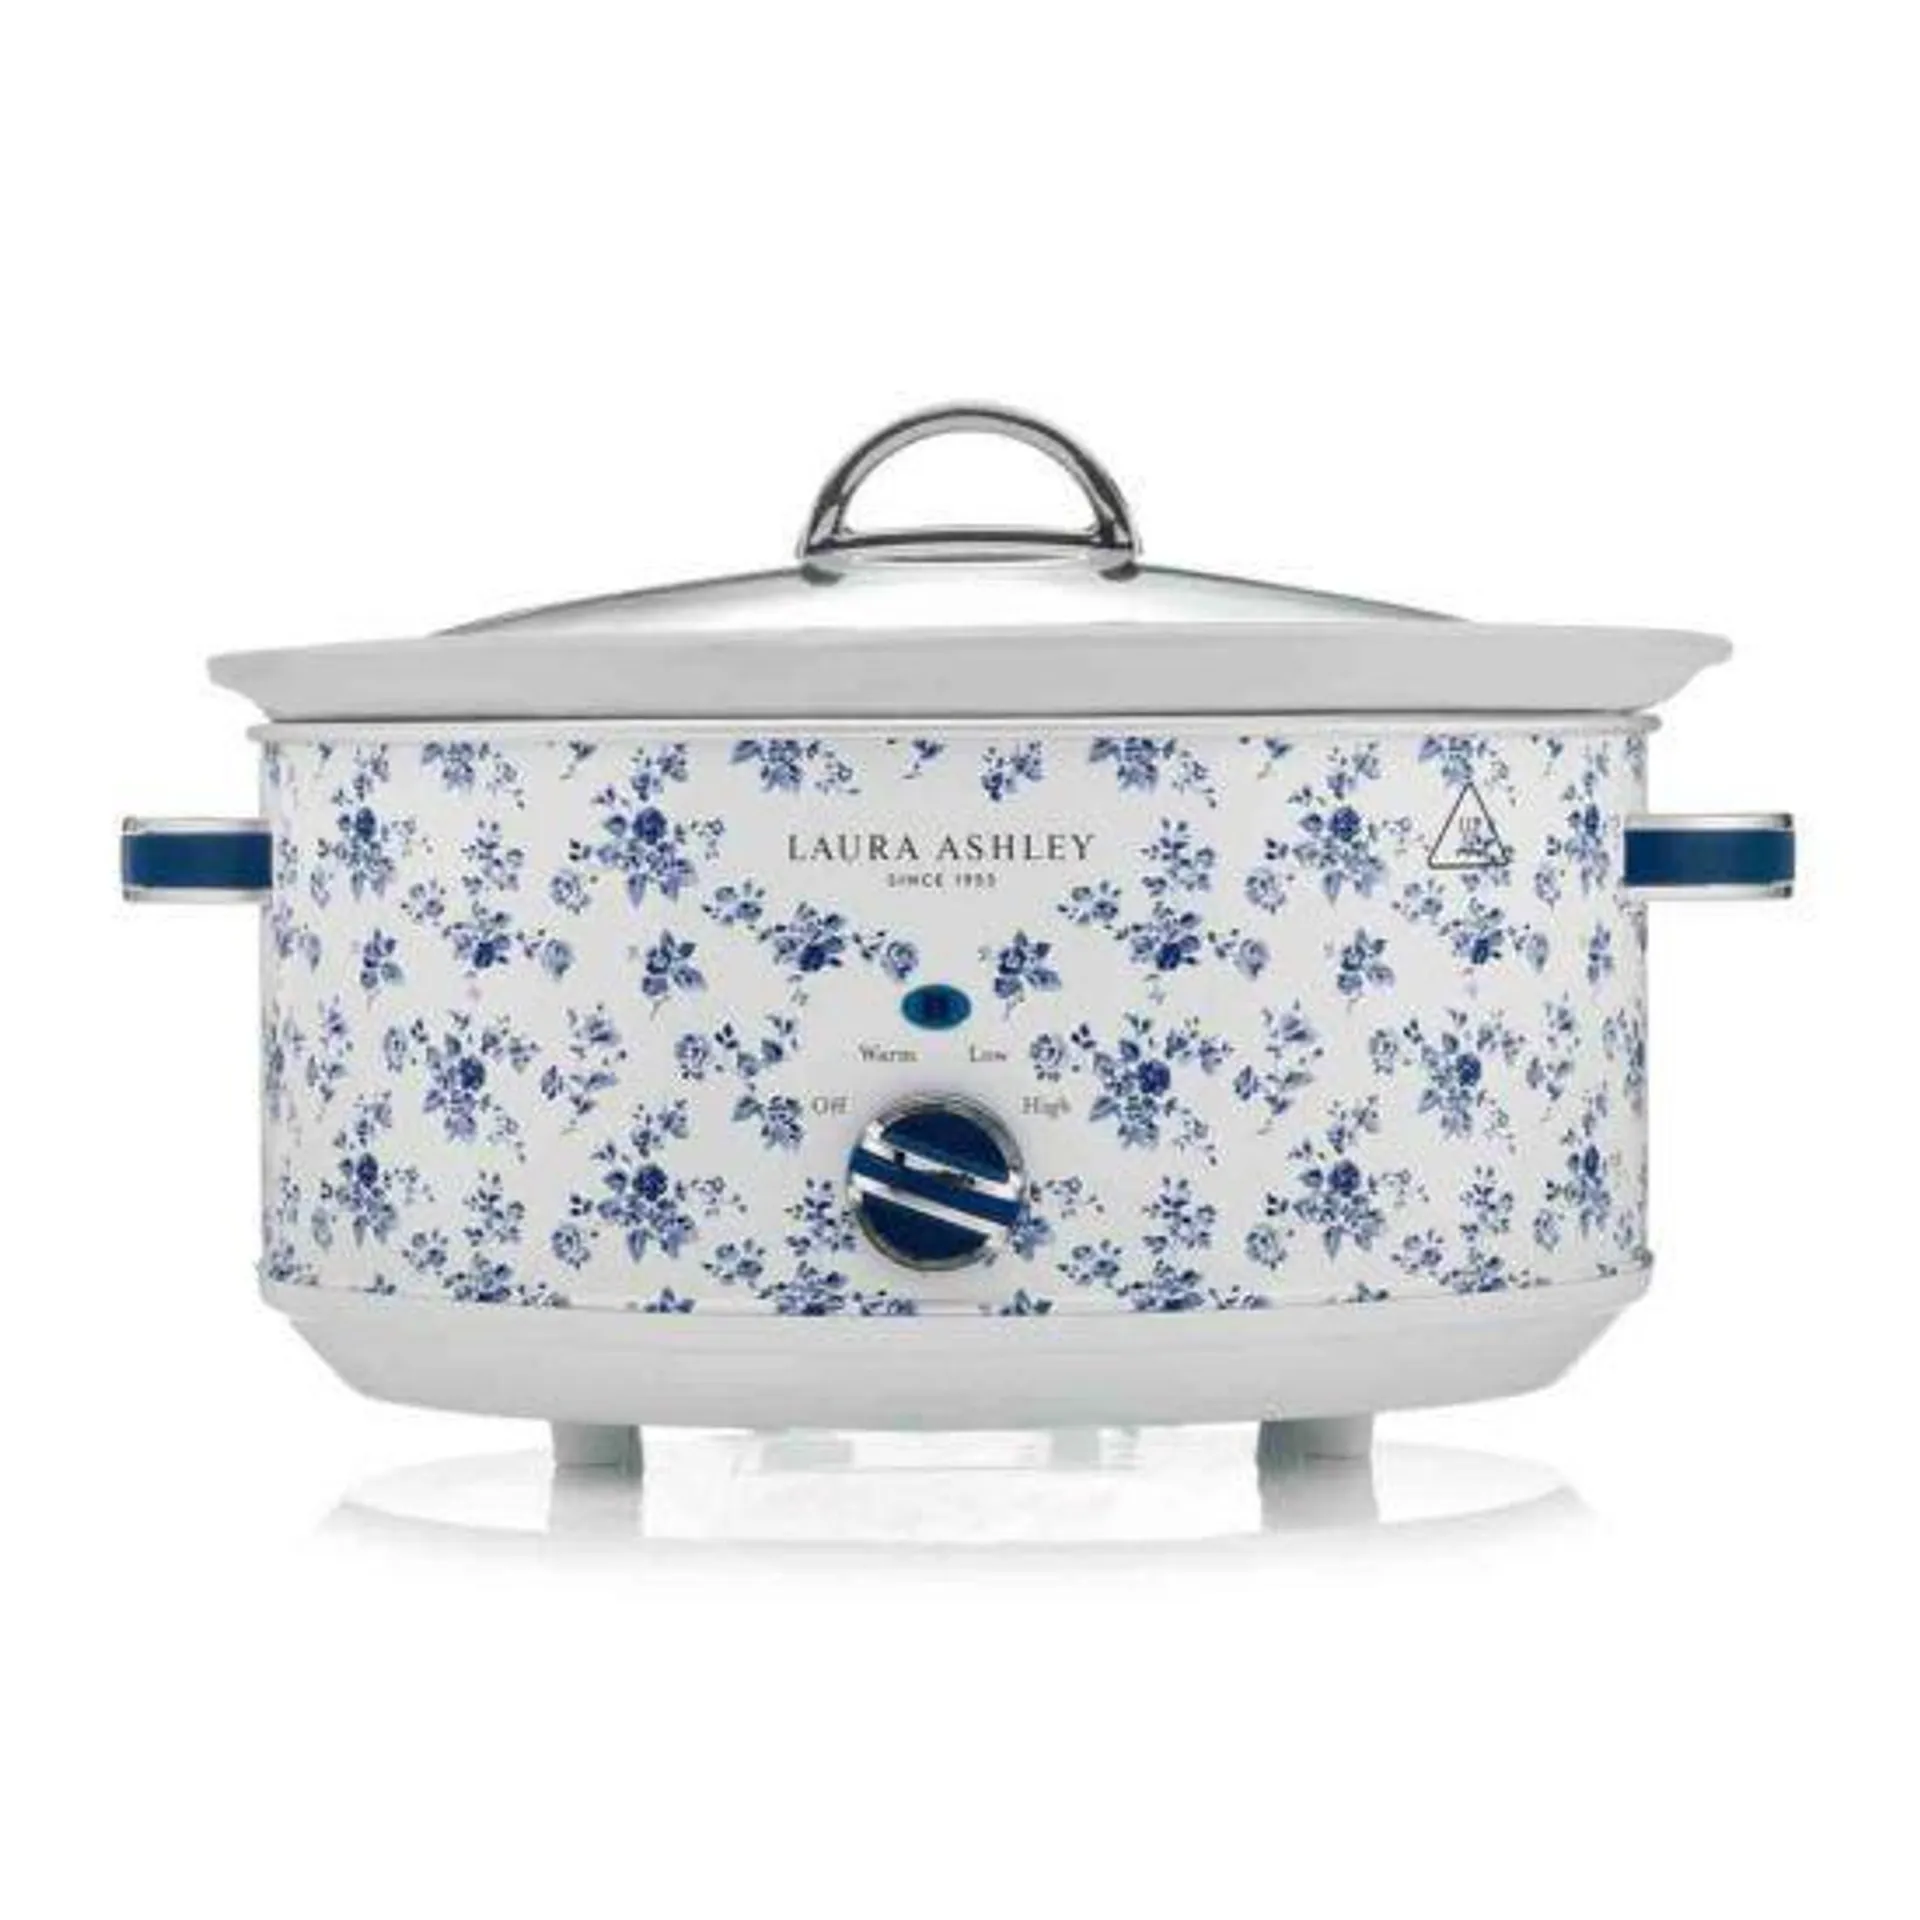 VQ - Laura Ashley 6.5L Slow Cooker – China Rose